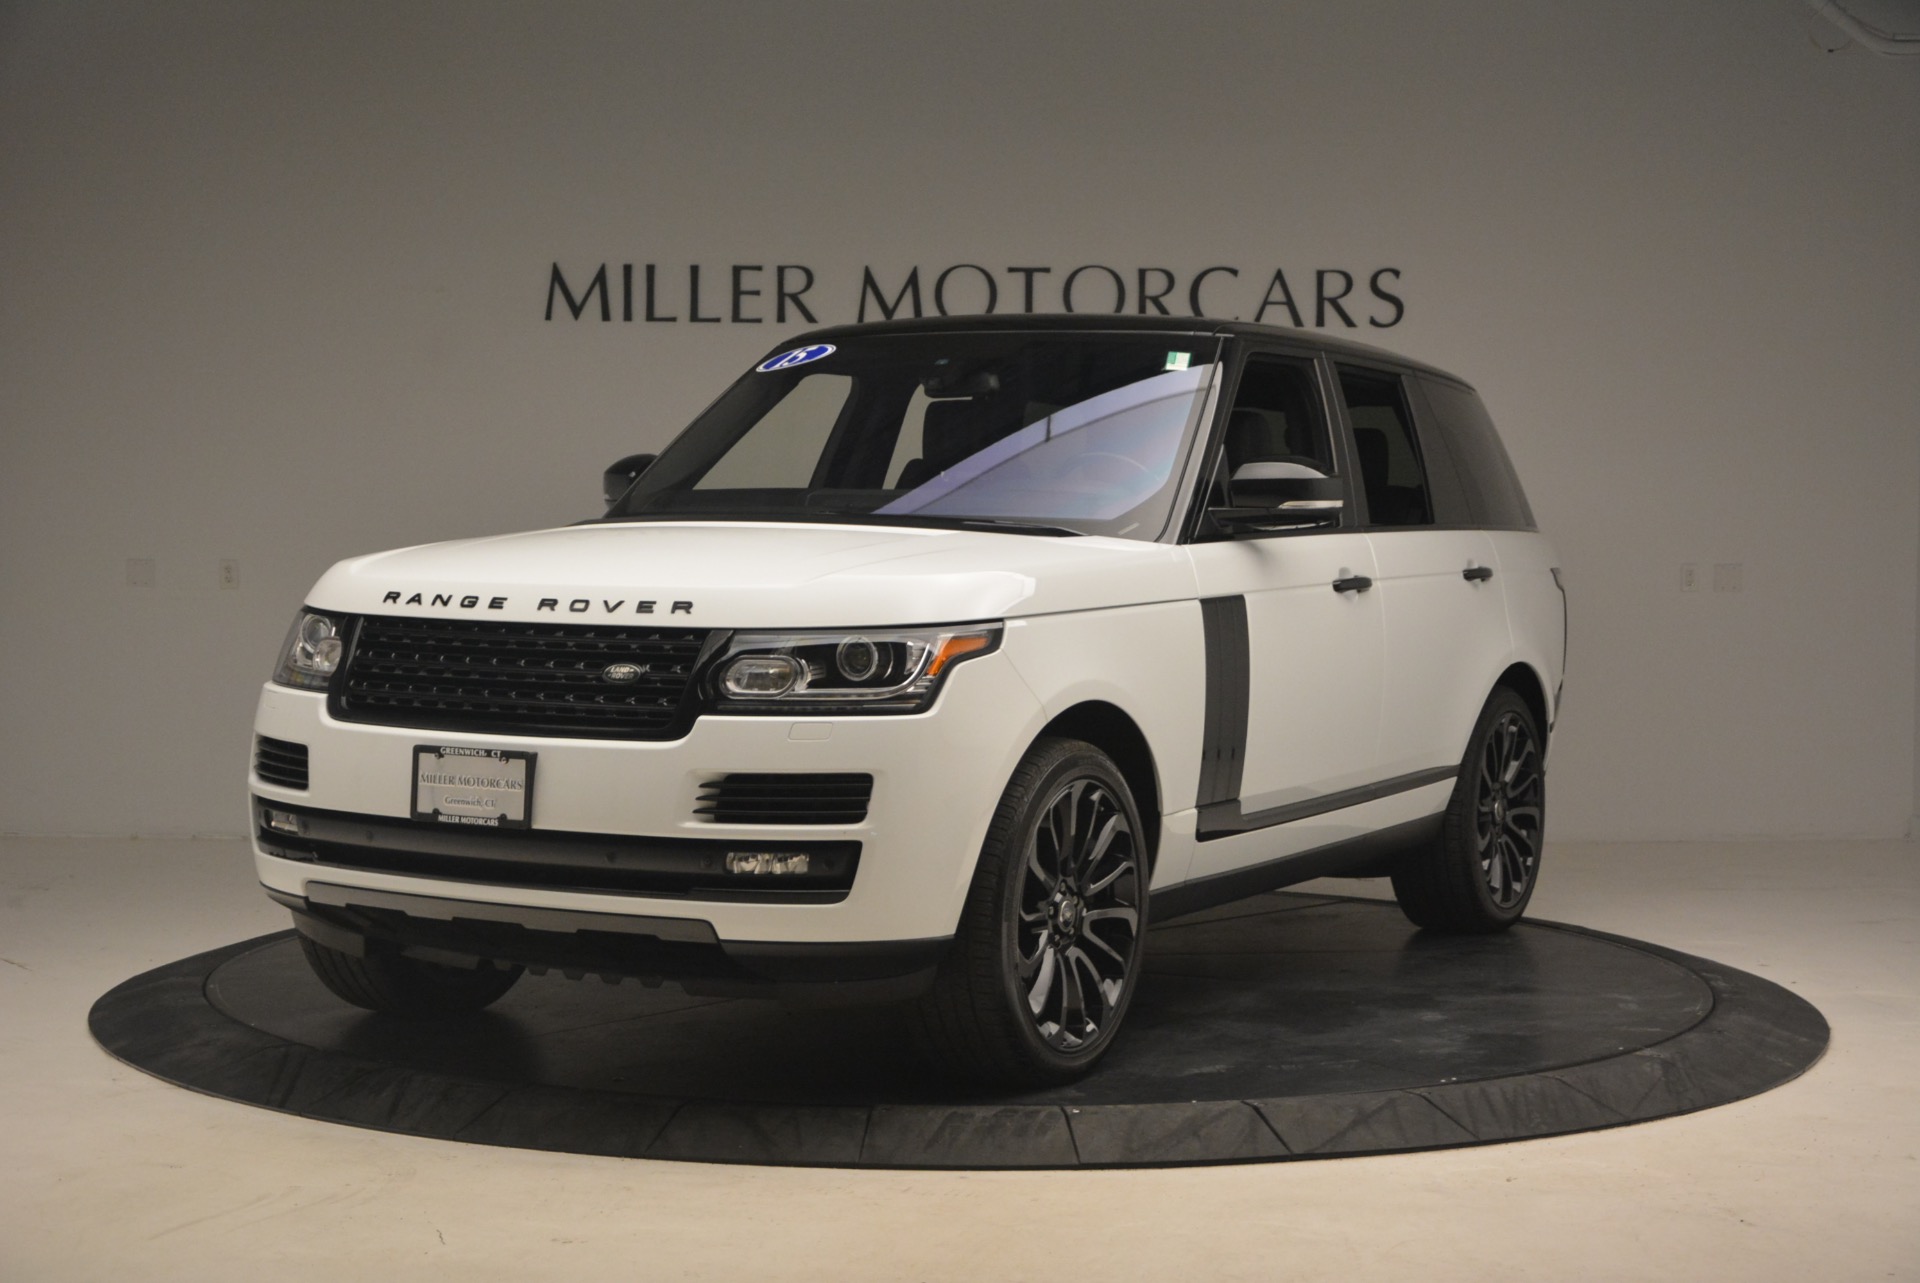 Used 2015 Land Rover Range Rover Supercharged for sale Sold at Bugatti of Greenwich in Greenwich CT 06830 1